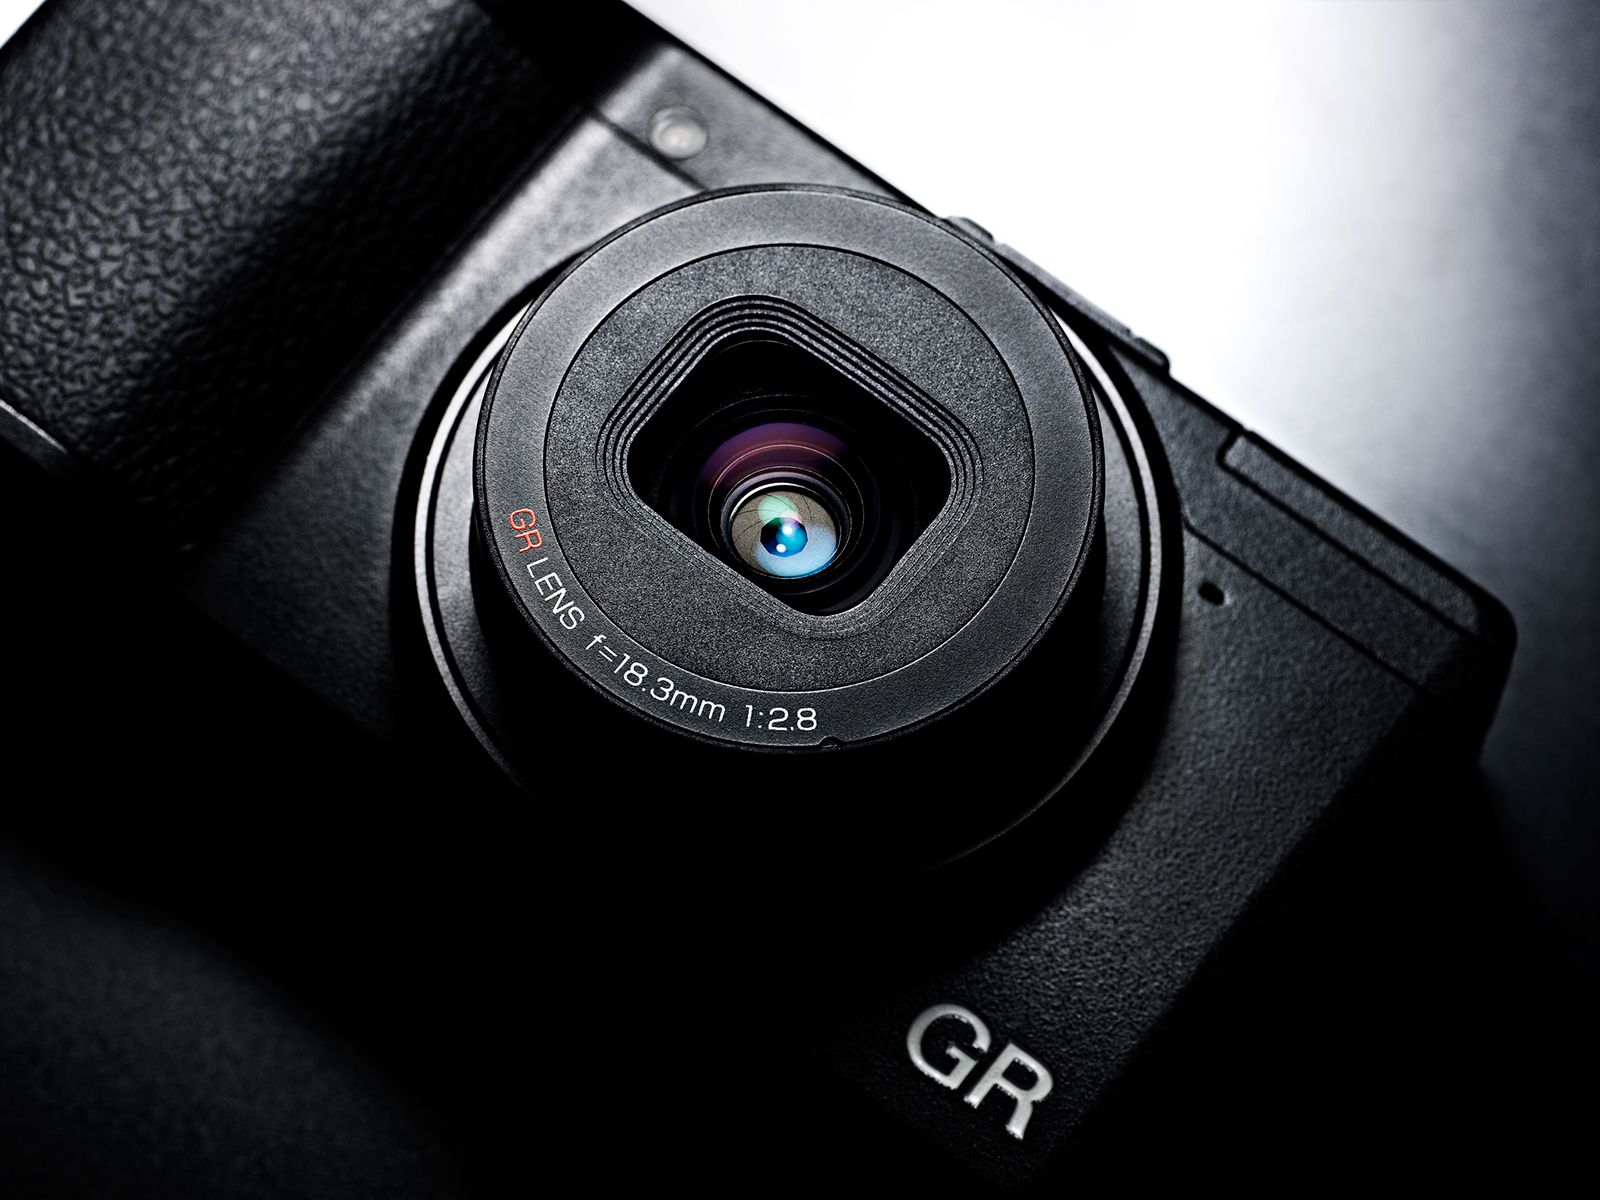 ricoh gr ii compact camera brings upgraded processing large image sensor and smartphone support image 1